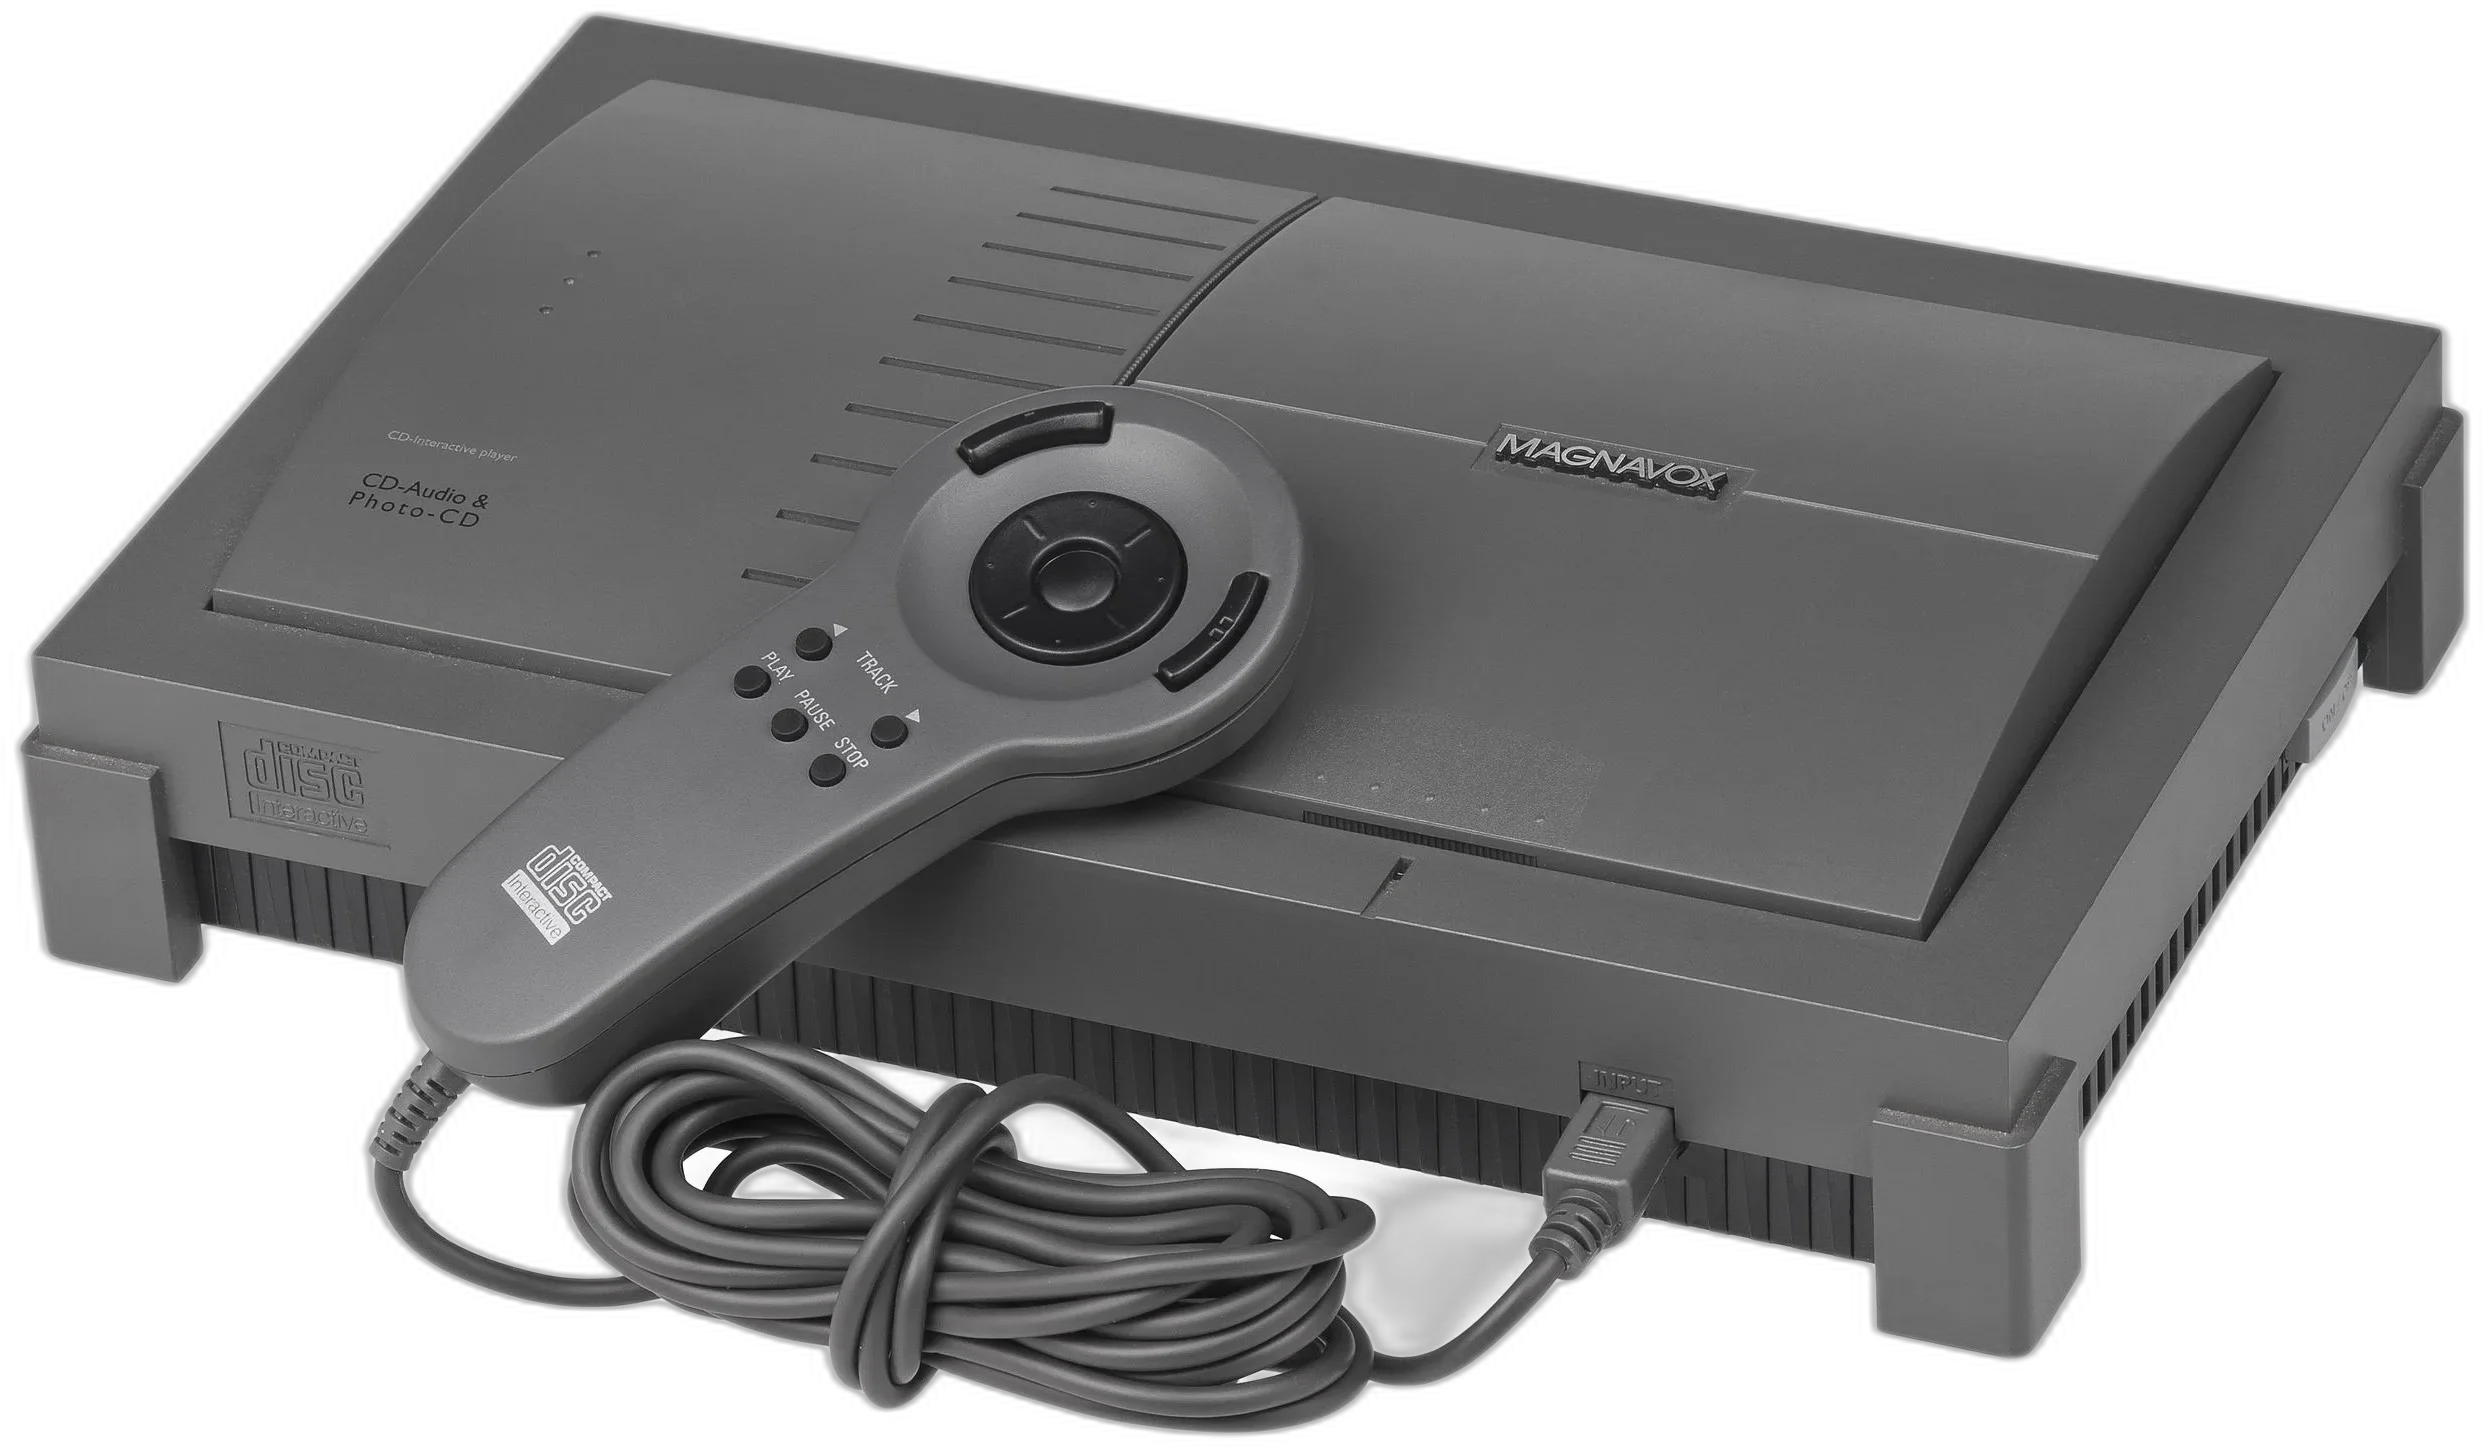  Philips CD-i 550 Console